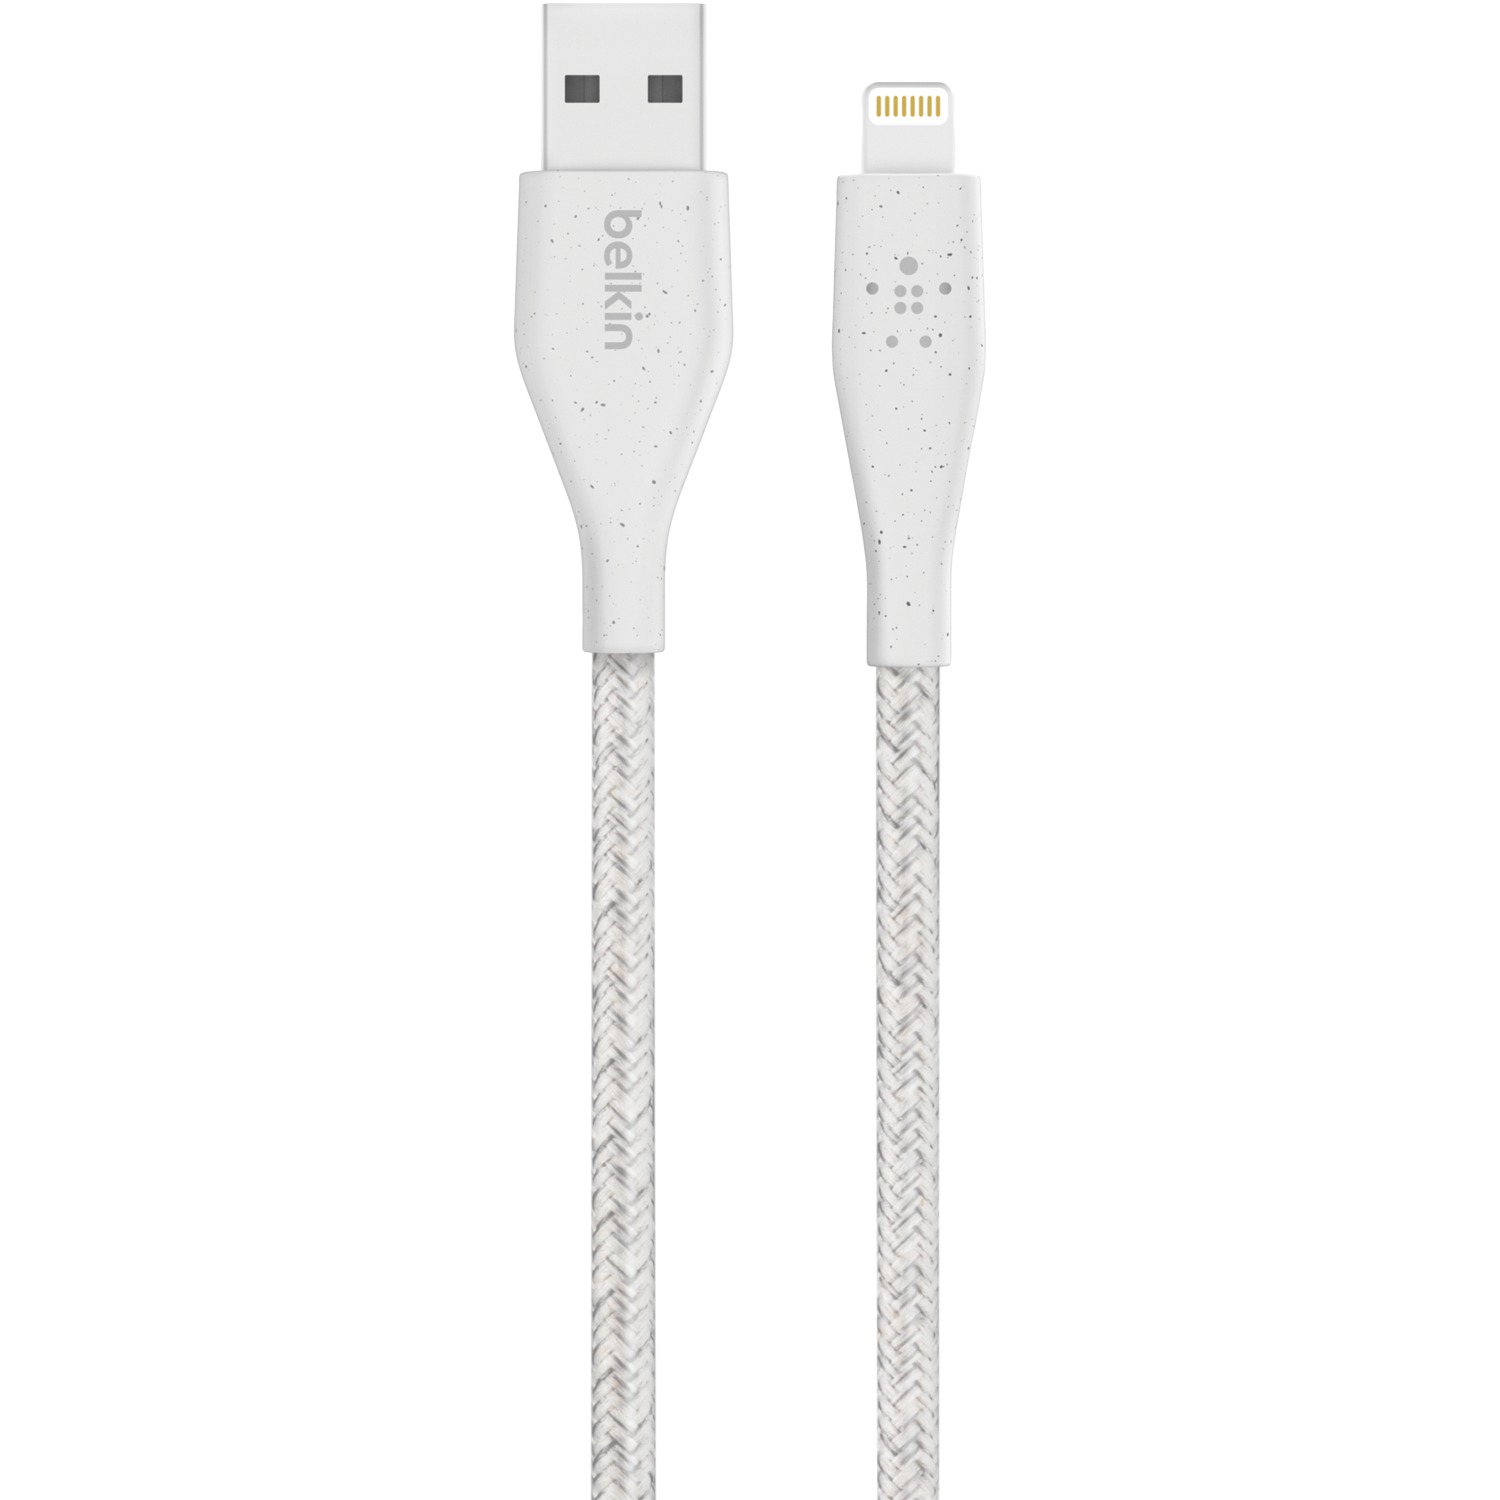 Belkin F8J236bt04-WHT DuraTek Plus Lightning to USB-A Cable, 4 Feet (White) - image 1 of 9